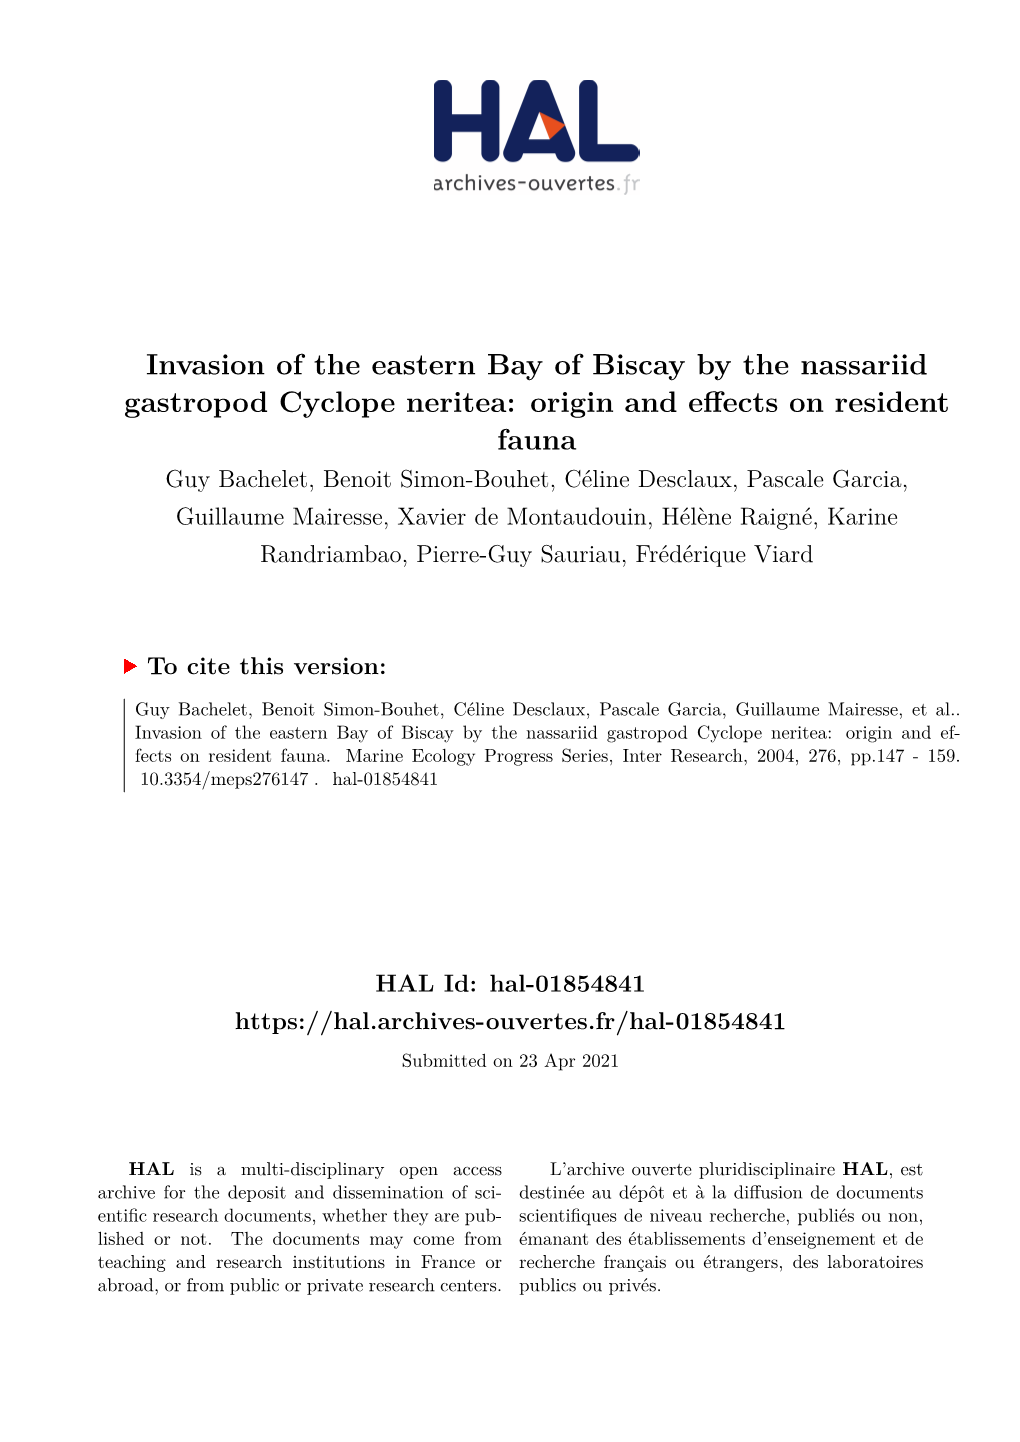 Invasion of the Eastern Bay of Biscay by the Nassariid Gastropod Cyclope